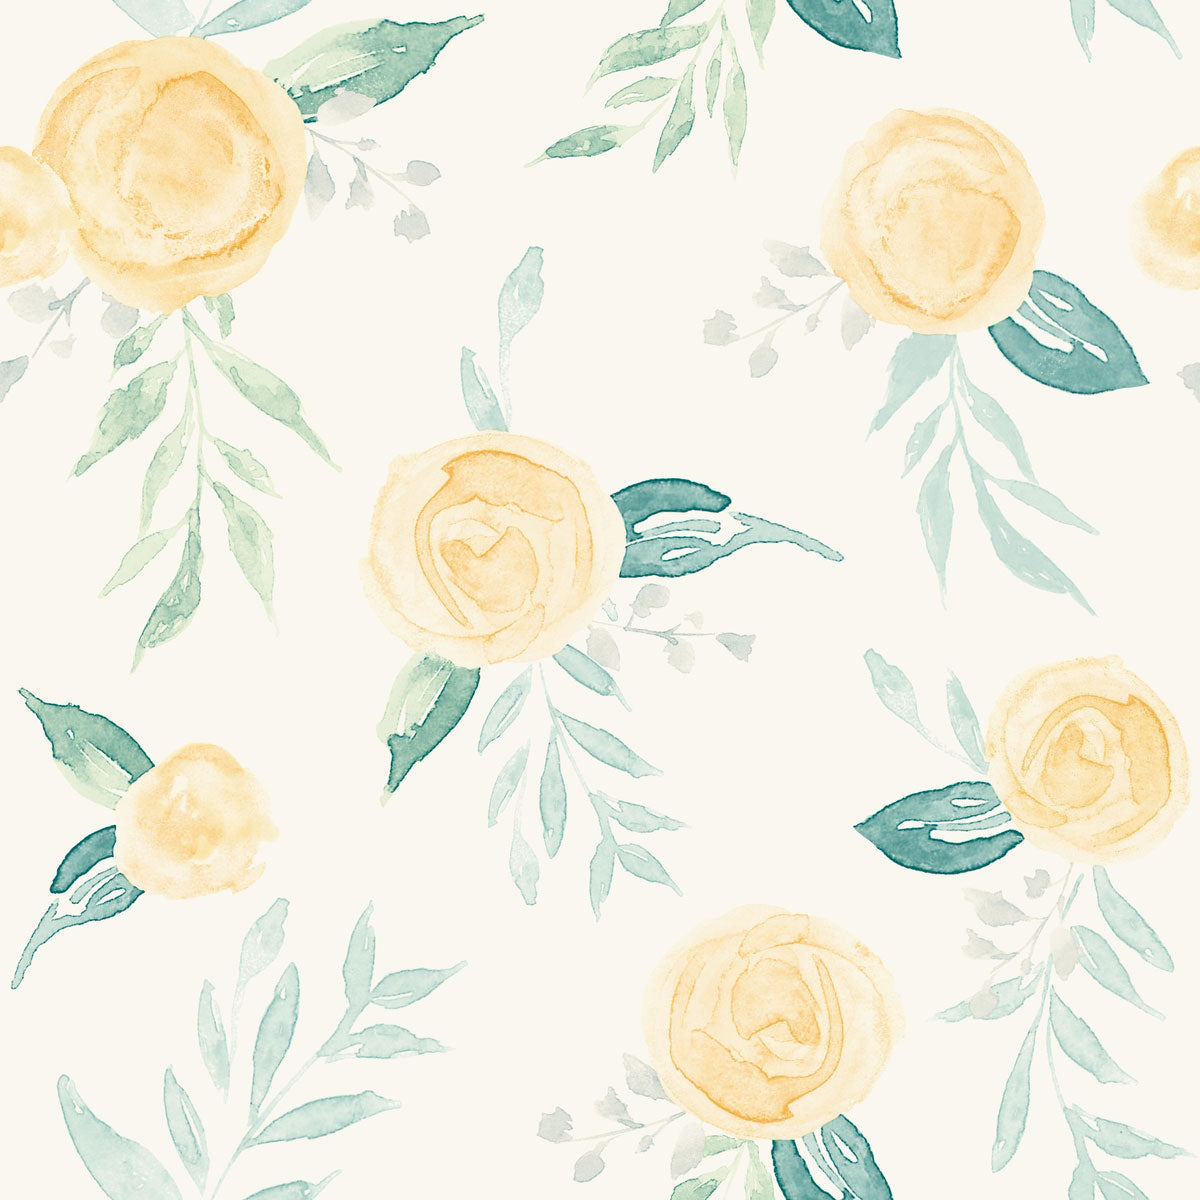 Magnolia Home Watercolor Roses Wallpaper - SAMPLE SWATCH ONLY